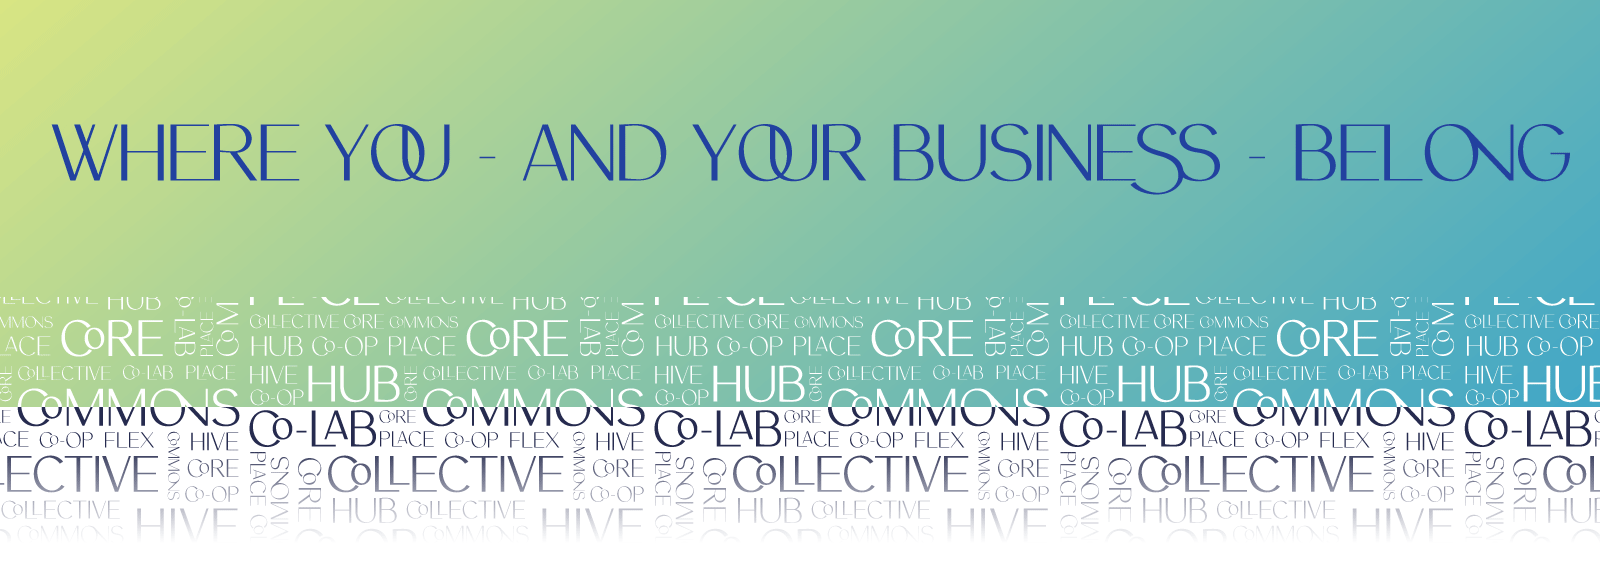 Where you and your business belong